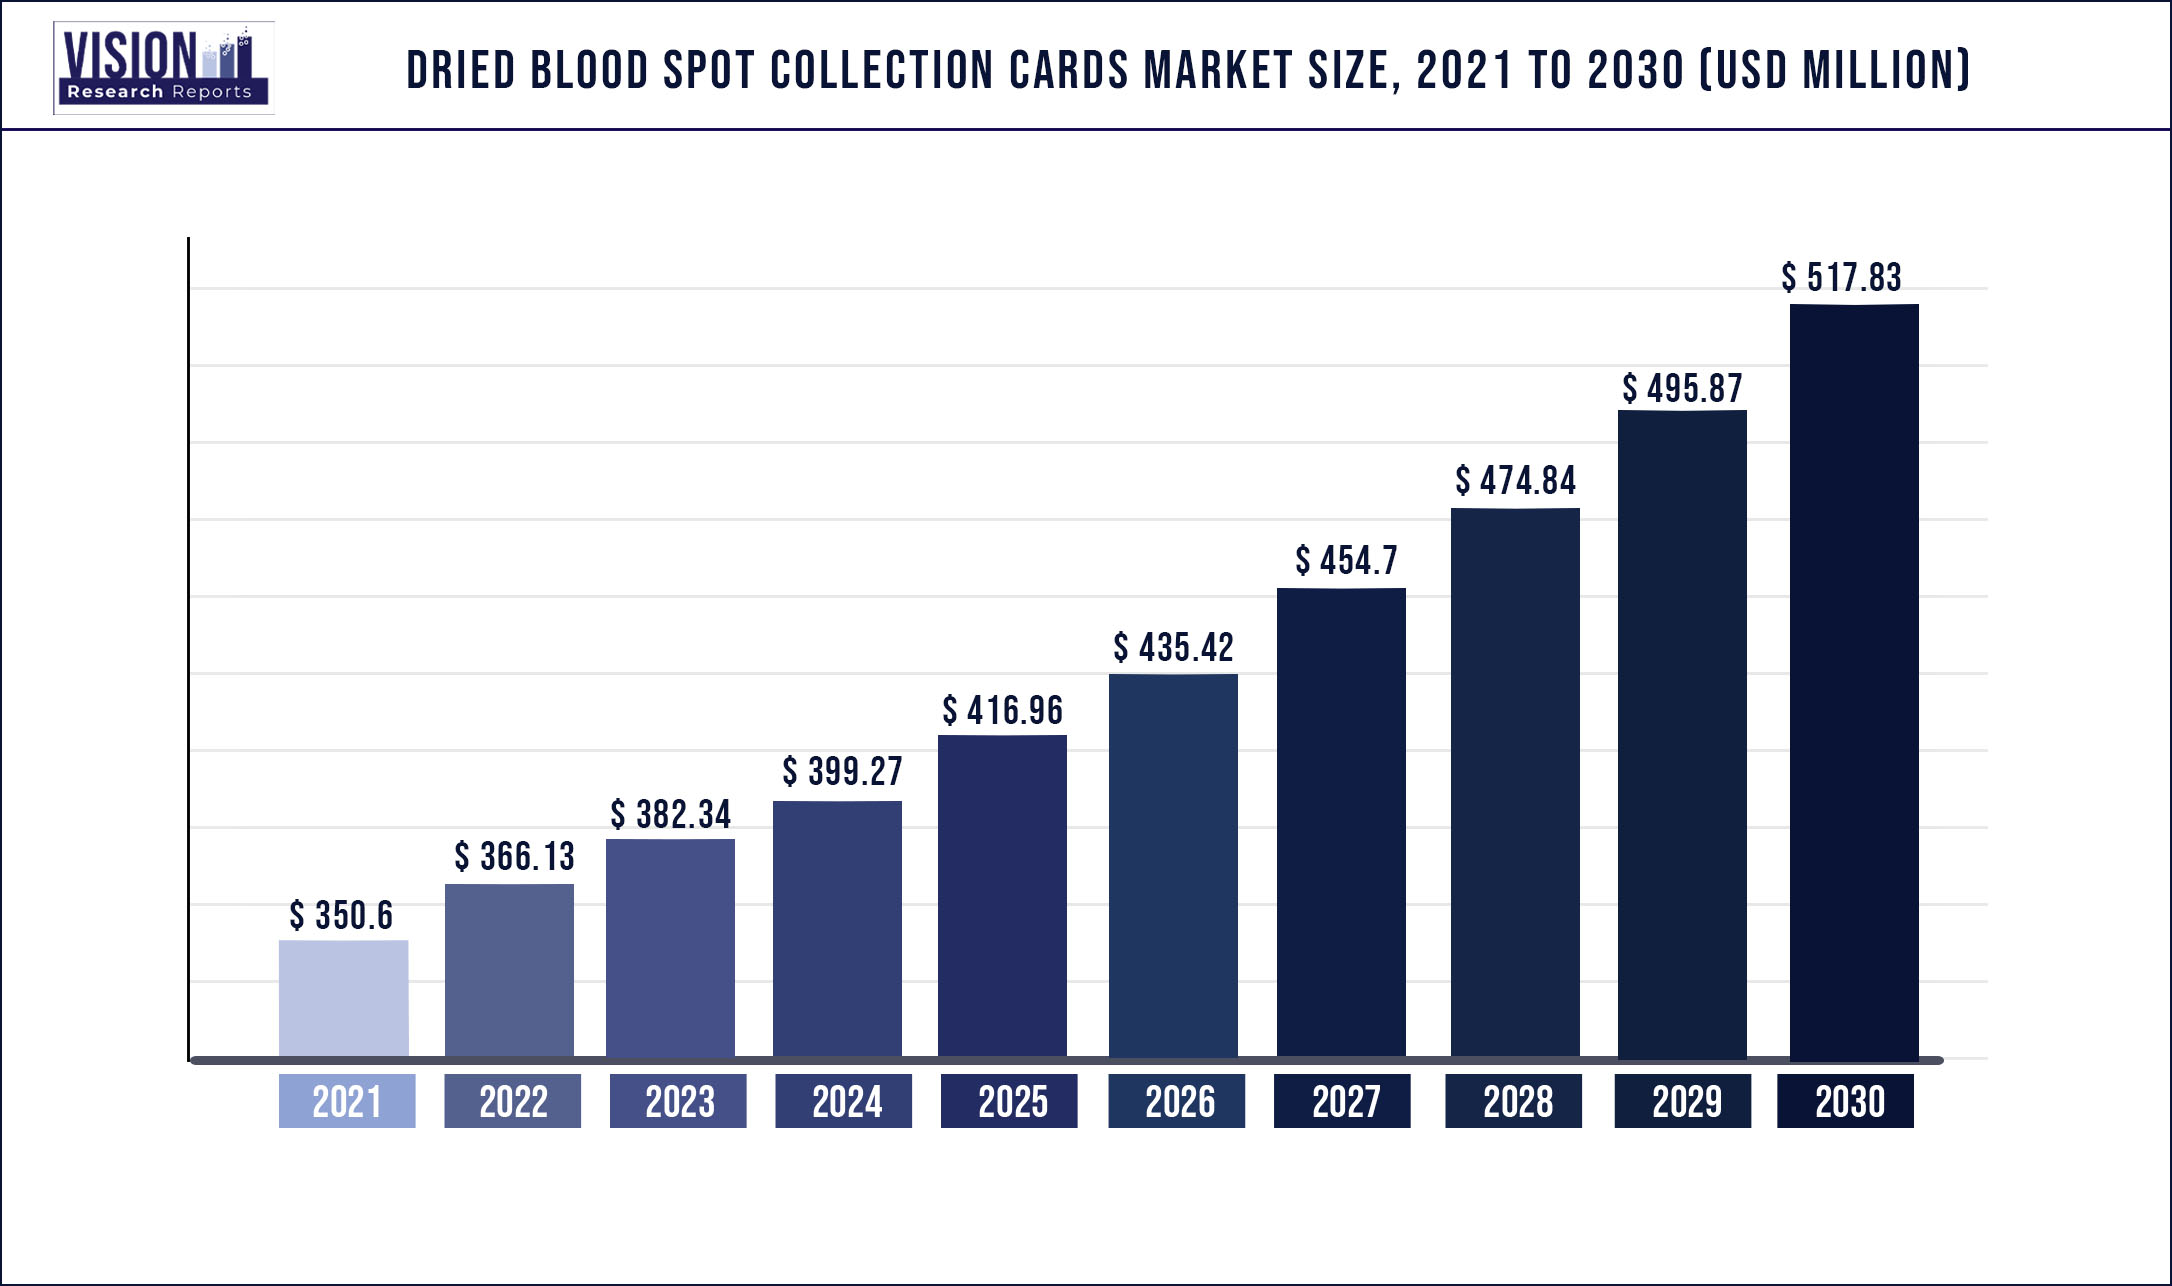 Dried Blood Spot Collection Cards Market Size 2021 to 2030